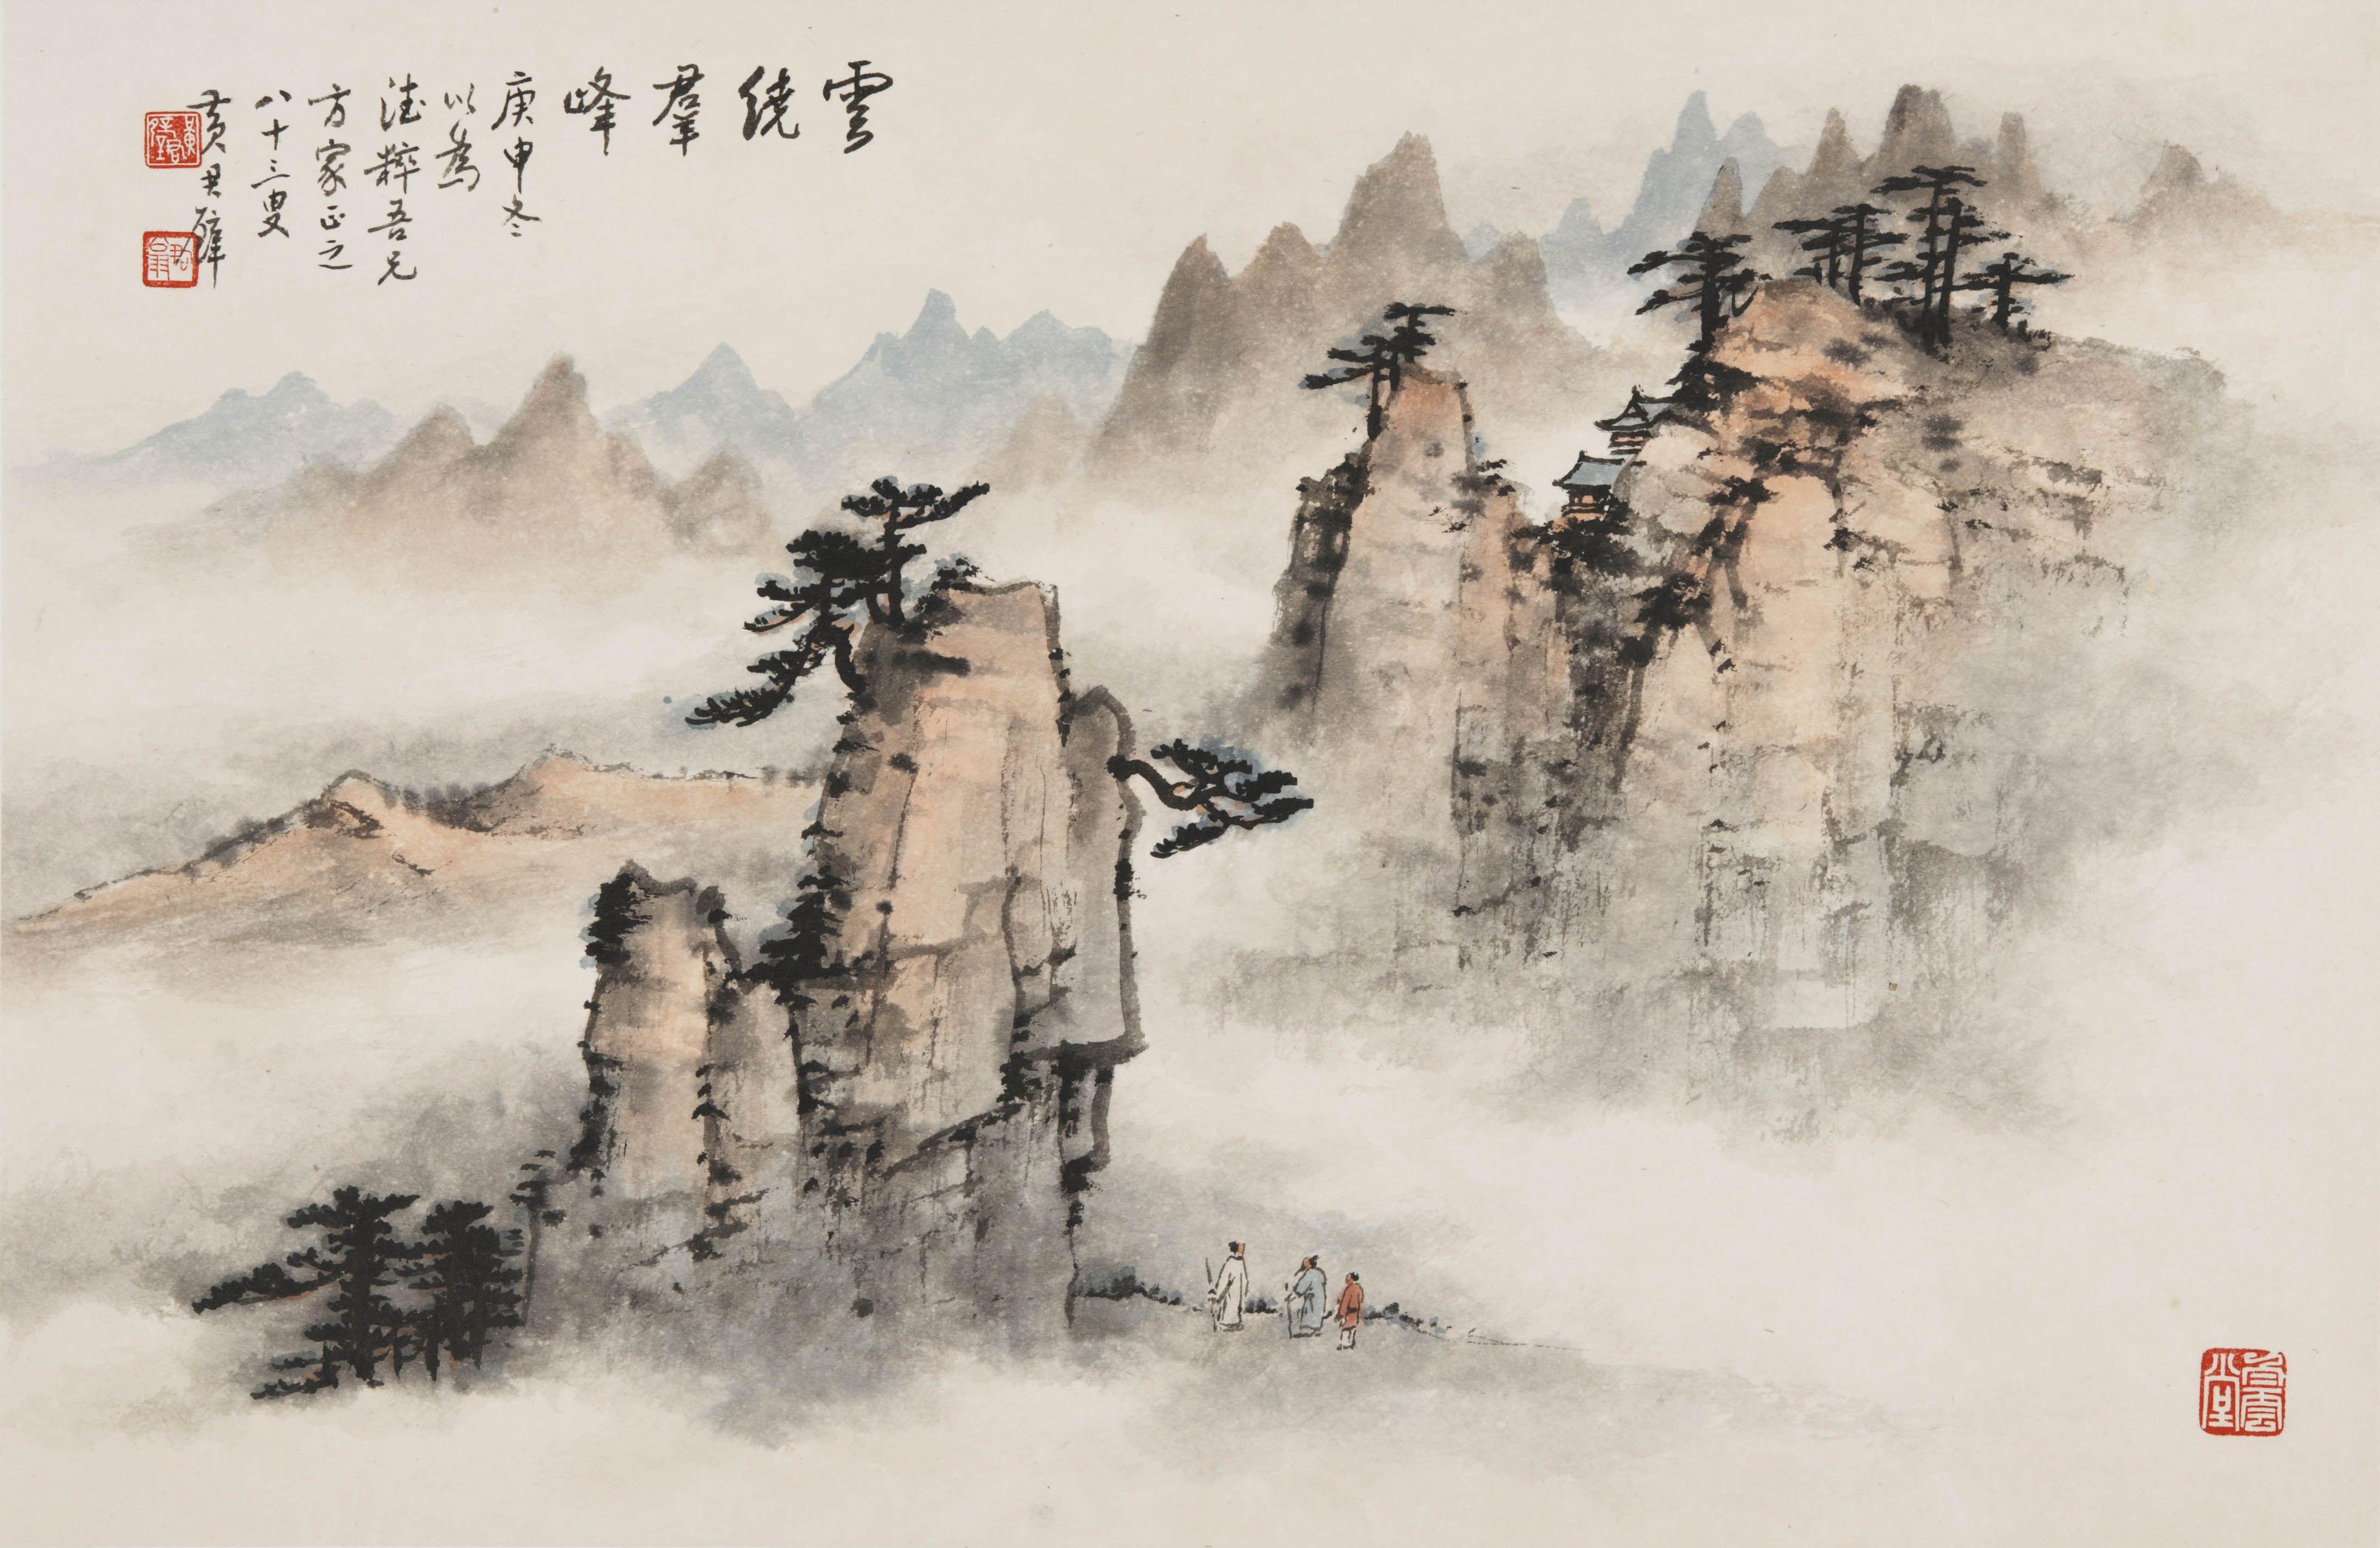 Traditional Chinese Paintings Wallpaper Free